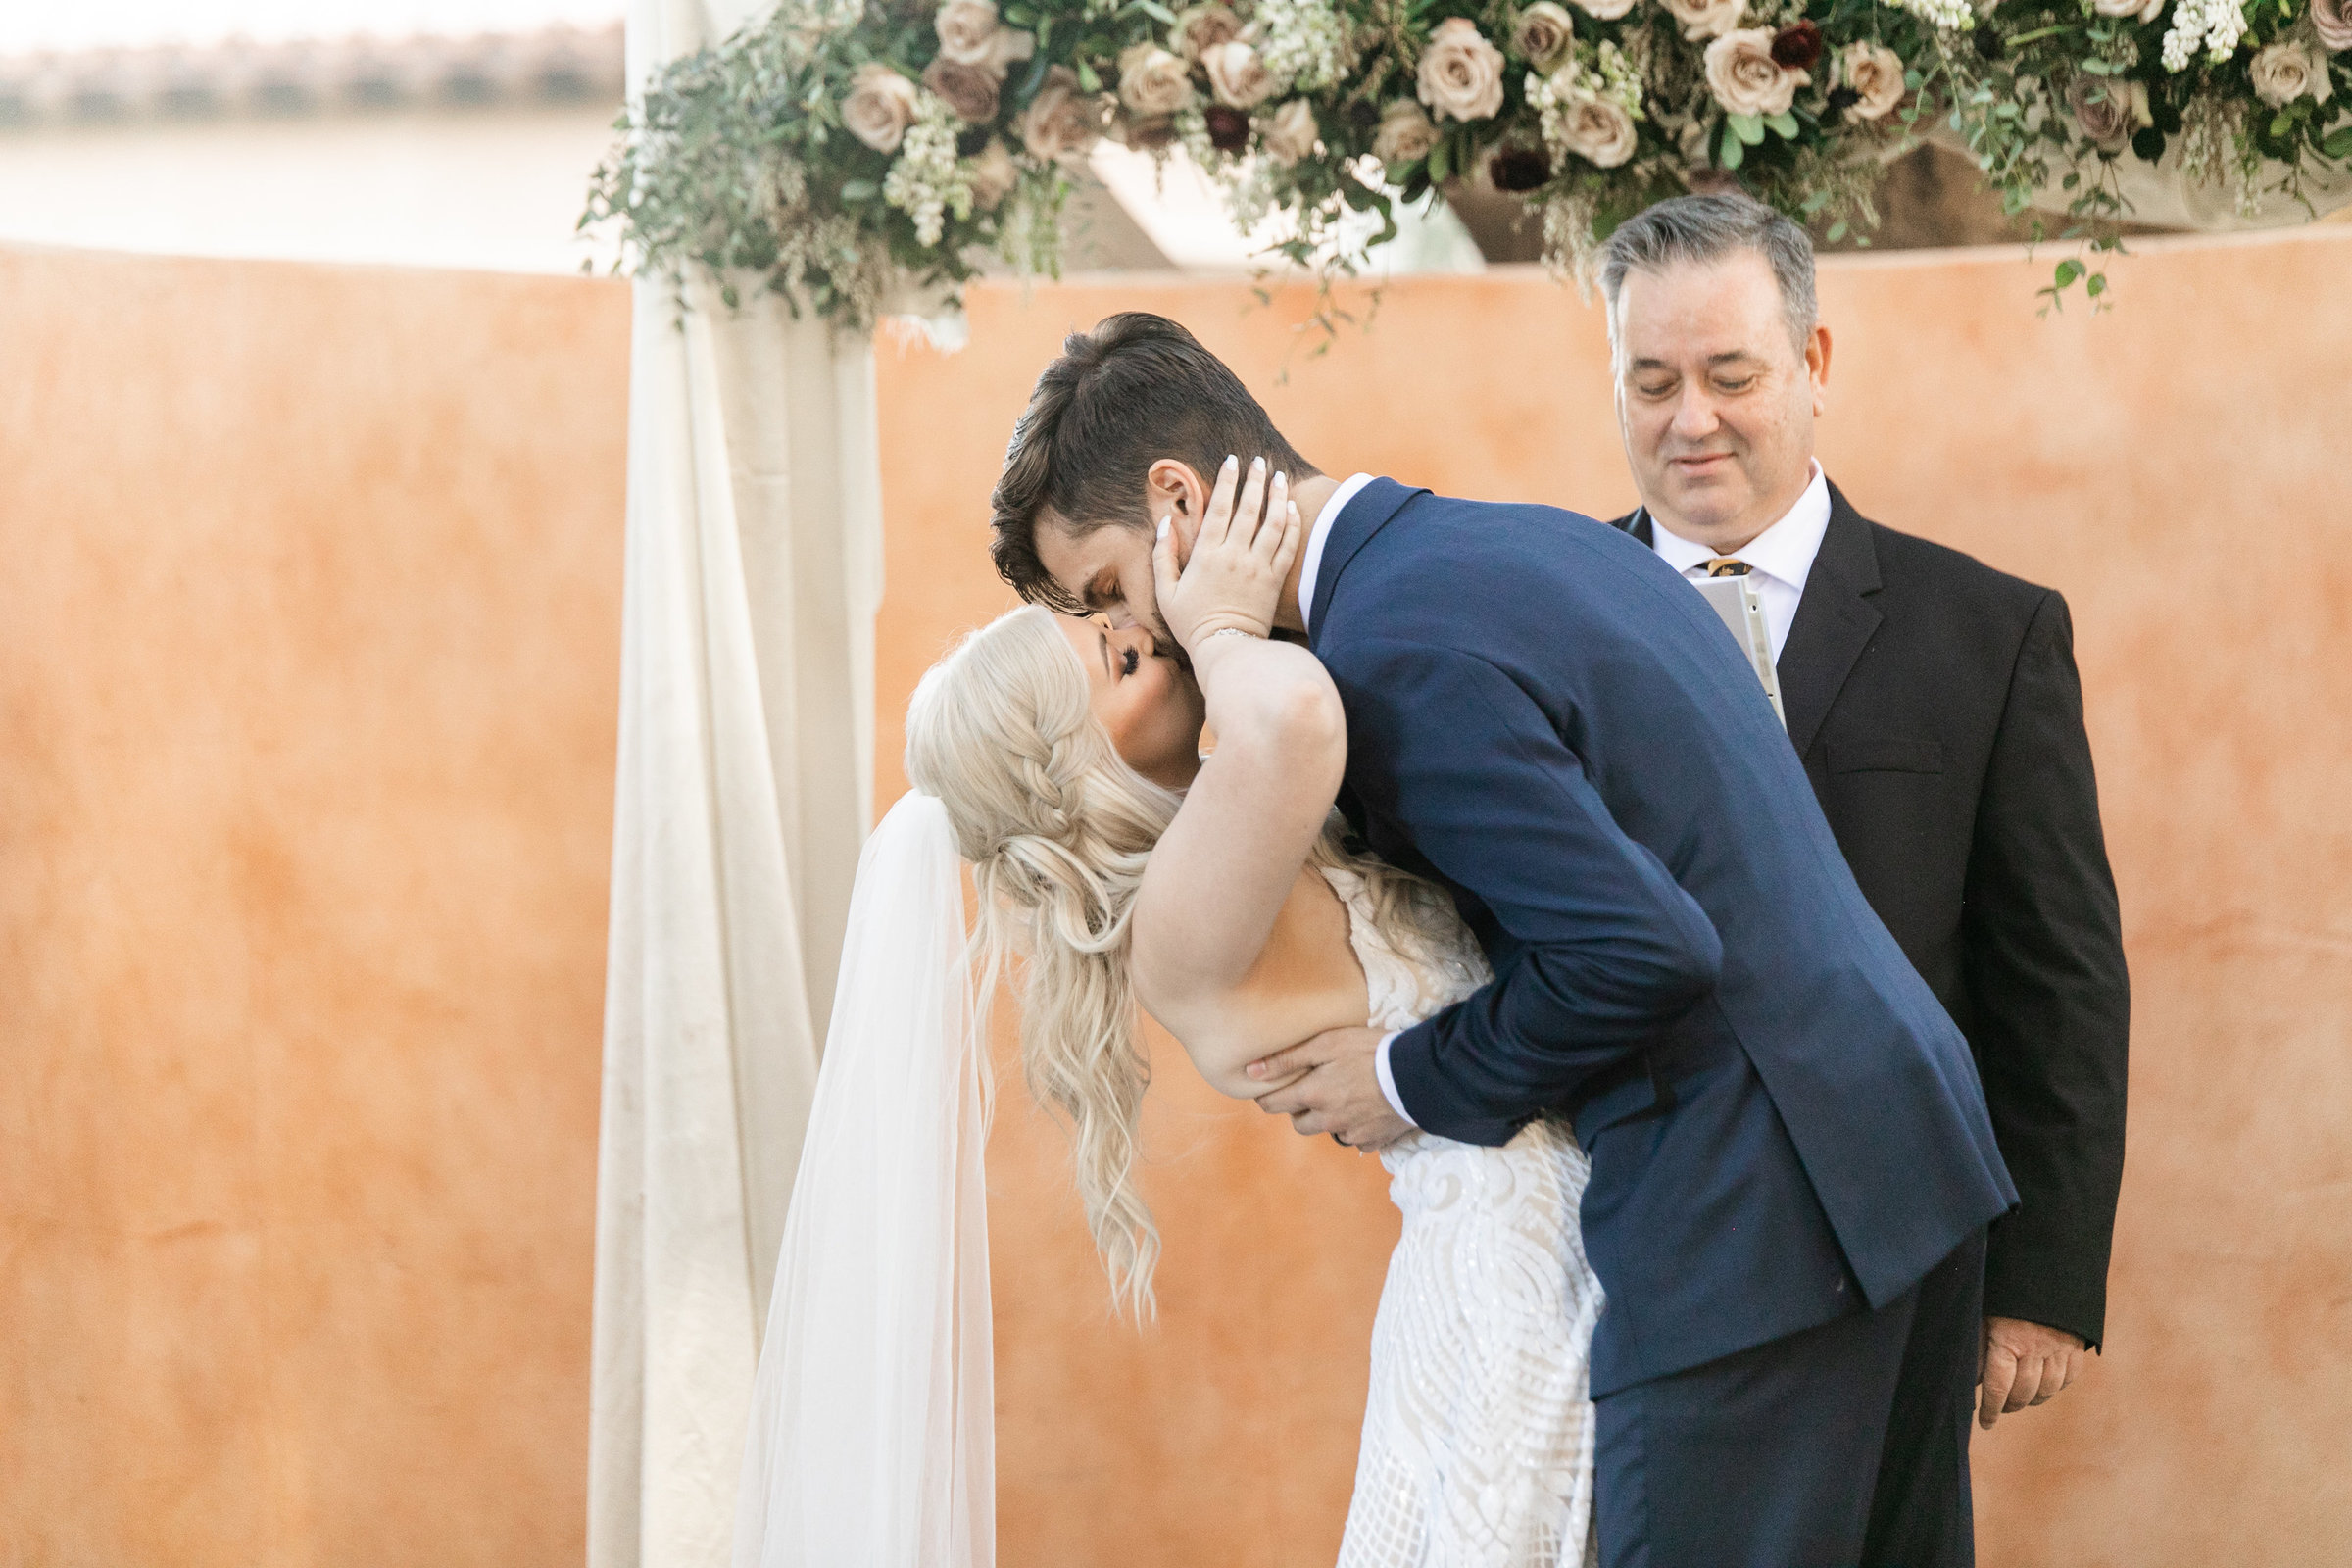 Karlie Colleen Photography - The Royal Palms Wedding - Some Like It Classic - Alex & Sam-529